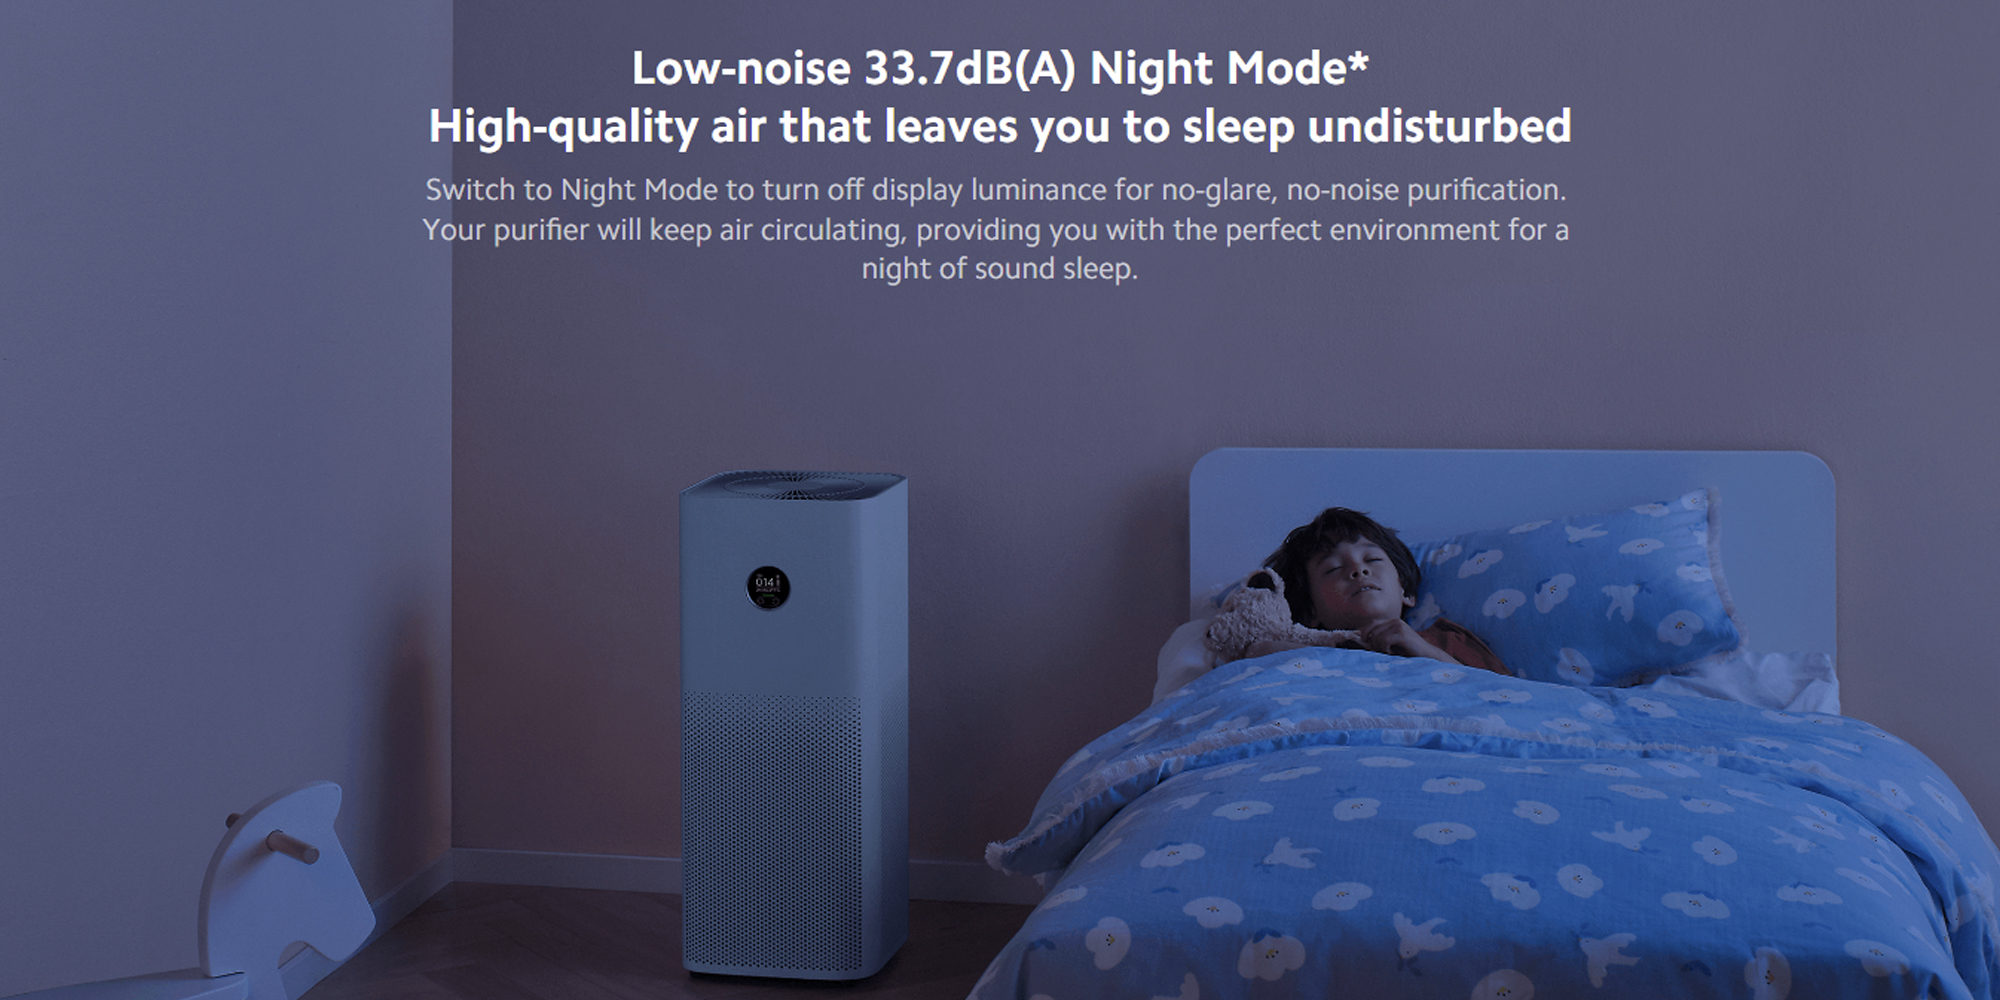 Xiaomi Smart Air Purifier 4 Pro Uk Appvoice Control Suitable For Large Room Cleaner Global Version 500 M3H Pm Cadr Oled Touch 4 Xiaomi &Lt;Table Class=&Quot;A-Normal A-Spacing-Micro&Quot;&Gt; &Lt;Tbody&Gt; &Lt;Tr Class=&Quot;A-Spacing-Small Po-Color&Quot;&Gt; &Lt;Td Class=&Quot;A-Span3&Quot;&Gt;&Lt;Span Class=&Quot;A-Size-Base A-Text-Bold&Quot;&Gt;Colour&Lt;/Span&Gt;&Lt;/Td&Gt; &Lt;Td Class=&Quot;A-Span9&Quot;&Gt;&Lt;Span Class=&Quot;A-Size-Base Po-Break-Word&Quot;&Gt;White&Lt;/Span&Gt;&Lt;/Td&Gt; &Lt;/Tr&Gt; &Lt;Tr Class=&Quot;A-Spacing-Small Po-Brand&Quot;&Gt; &Lt;Td Class=&Quot;A-Span3&Quot;&Gt;&Lt;Span Class=&Quot;A-Size-Base A-Text-Bold&Quot;&Gt;Brand&Lt;/Span&Gt;&Lt;/Td&Gt; &Lt;Td Class=&Quot;A-Span9&Quot;&Gt;&Lt;Span Class=&Quot;A-Size-Base Po-Break-Word&Quot;&Gt;Xiaomi&Lt;/Span&Gt;&Lt;/Td&Gt; &Lt;/Tr&Gt; &Lt;Tr Class=&Quot;A-Spacing-Small Po-Item_Depth_Width_Height&Quot;&Gt; &Lt;Td Class=&Quot;A-Span3&Quot;&Gt;&Lt;Span Class=&Quot;A-Size-Base A-Text-Bold&Quot;&Gt;Product Dimensions&Lt;/Span&Gt;&Lt;/Td&Gt; &Lt;Td Class=&Quot;A-Span9&Quot;&Gt;&Lt;Span Class=&Quot;A-Size-Base Po-Break-Word&Quot;&Gt;27.5D X 27.5W X 68H Centimeters&Lt;/Span&Gt;&Lt;/Td&Gt; &Lt;/Tr&Gt; &Lt;Tr Class=&Quot;A-Spacing-Small Po-Power_Source_Type&Quot;&Gt; &Lt;Td Class=&Quot;A-Span3&Quot;&Gt;&Lt;Span Class=&Quot;A-Size-Base A-Text-Bold&Quot;&Gt;Power Source&Lt;/Span&Gt;&Lt;/Td&Gt; &Lt;Td Class=&Quot;A-Span9&Quot;&Gt;&Lt;Span Class=&Quot;A-Size-Base Po-Break-Word&Quot;&Gt;Corded Electric&Lt;/Span&Gt;&Lt;/Td&Gt; &Lt;/Tr&Gt; &Lt;Tr Class=&Quot;A-Spacing-Small Po-Item_Weight&Quot;&Gt; &Lt;Td Class=&Quot;A-Span3&Quot;&Gt;&Lt;Span Class=&Quot;A-Size-Base A-Text-Bold&Quot;&Gt;Item Weight&Lt;/Span&Gt;&Lt;/Td&Gt; &Lt;Td Class=&Quot;A-Span9&Quot;&Gt;&Lt;Span Class=&Quot;A-Size-Base Po-Break-Word&Quot;&Gt;6.8 Kilograms&Lt;/Span&Gt;&Lt;/Td&Gt; &Lt;/Tr&Gt; &Lt;/Tbody&Gt; &Lt;/Table&Gt; &Lt;H5&Gt;We Also Provide International Wholesale And Retail Shipping To All Gcc Countries: Saudi Arabia, Qatar, Oman, Kuwait, Bahrain.&Lt;/H5&Gt; Xiaomi Xiaomi Smart Air Purifier 4 Pro